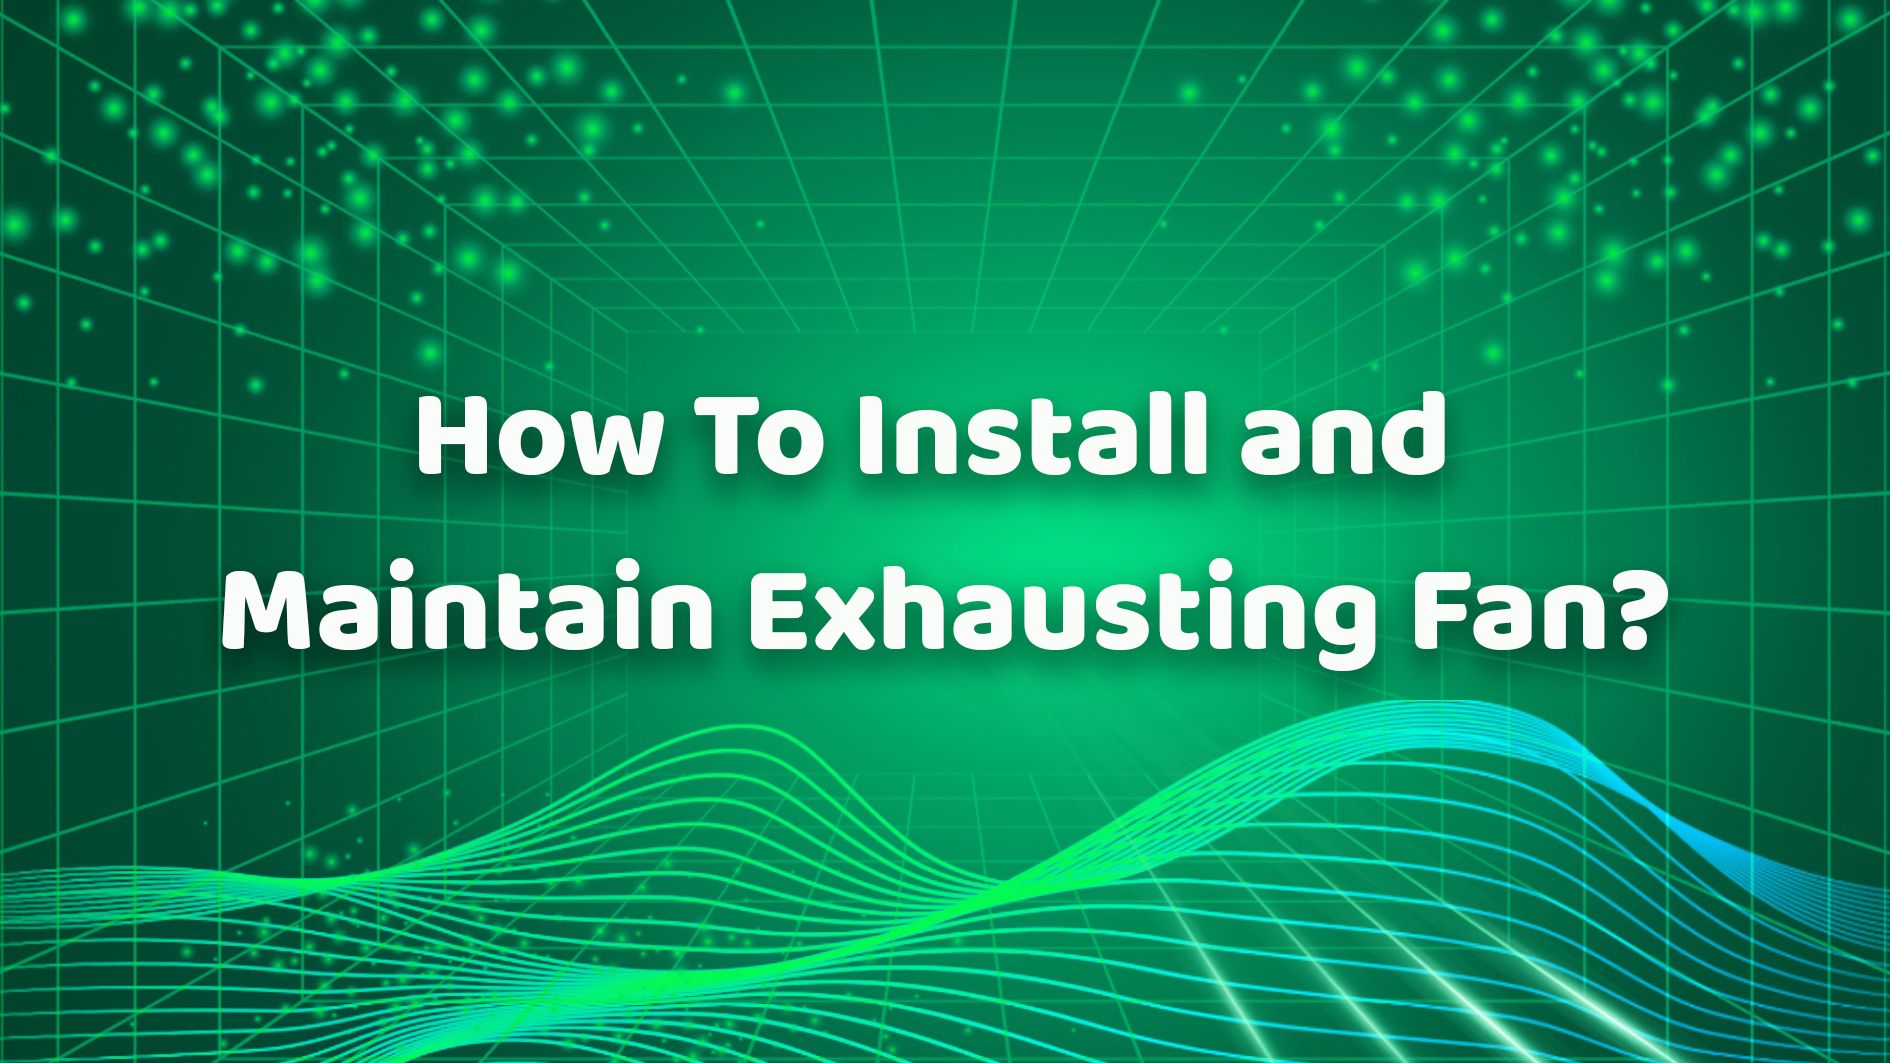 How To Install and Maintain Exhausting Fan？